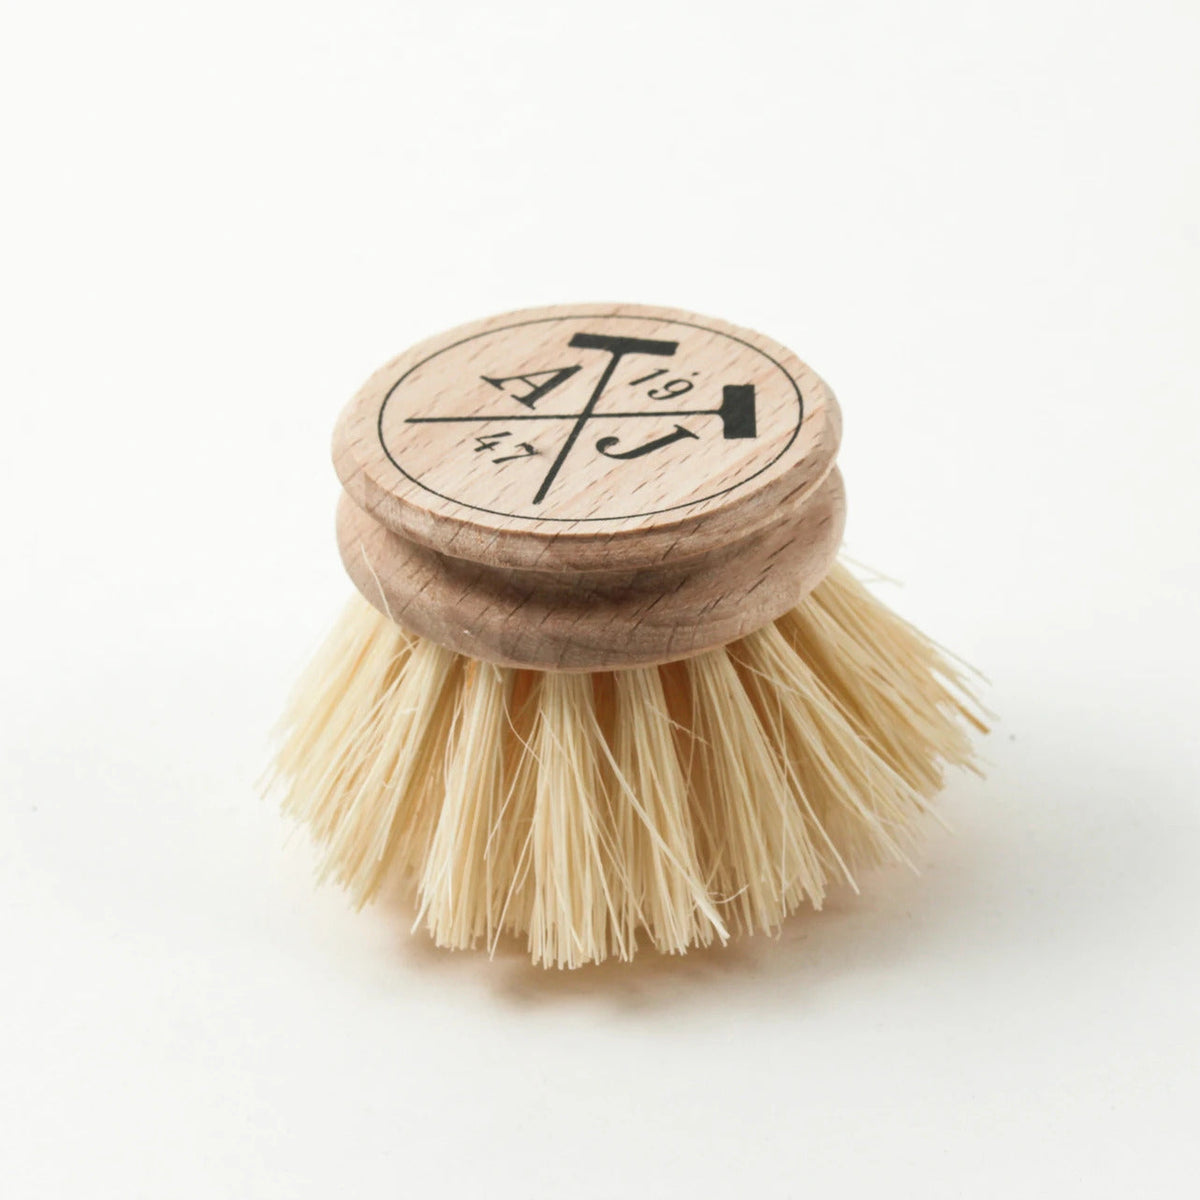 Andrée Jardin Tradition Handled Dish Brush Replacement